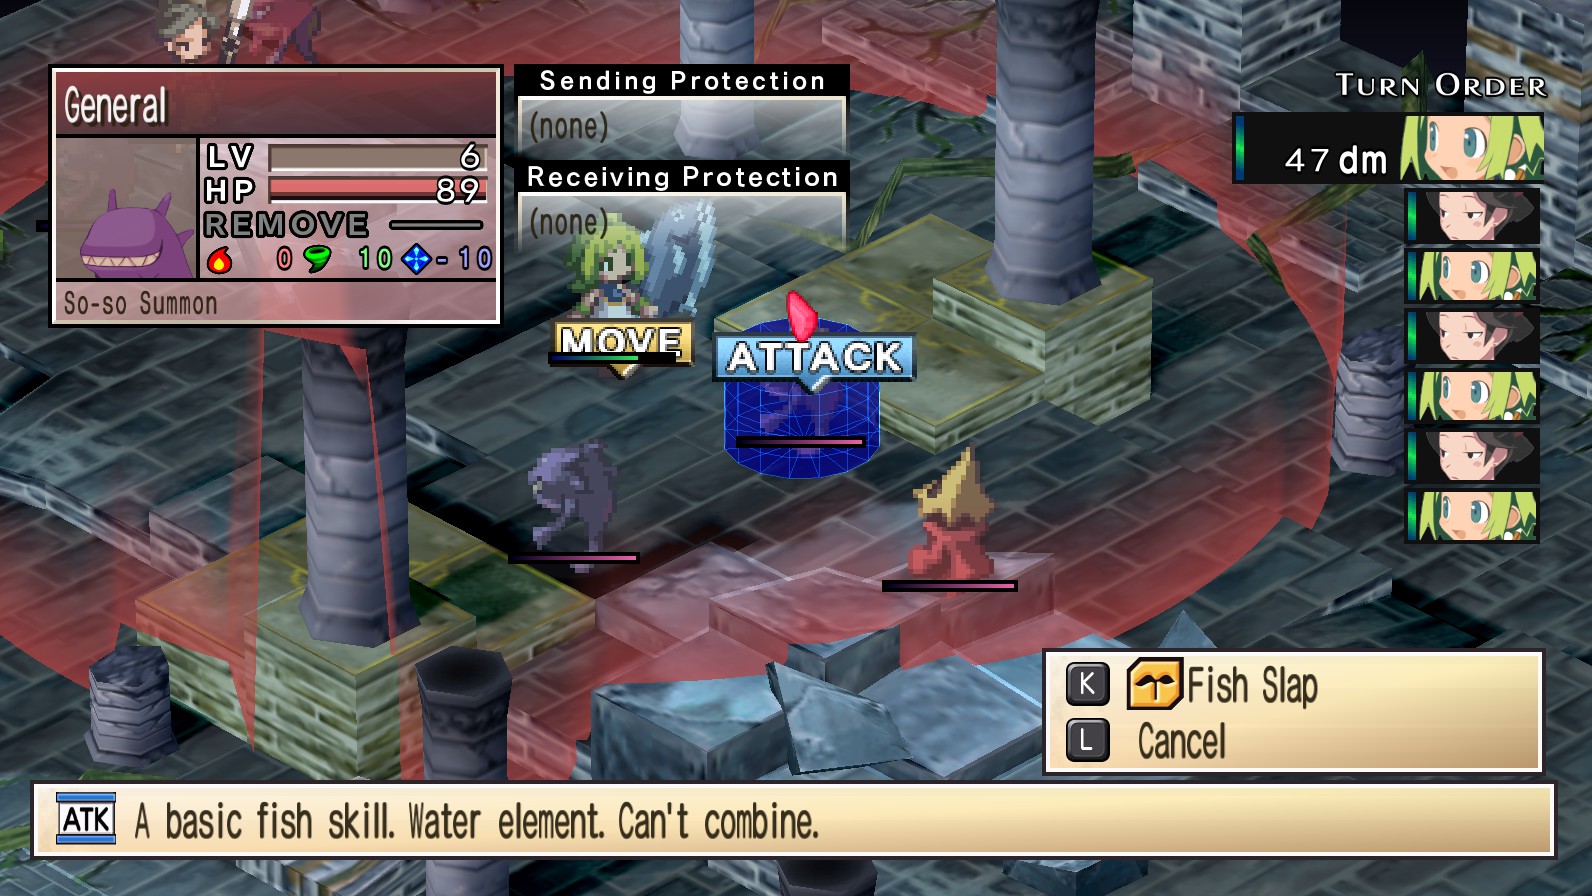 Best JRPGs - In Phantom Brave PC, the player prepares to attack a summoned enemy with a 